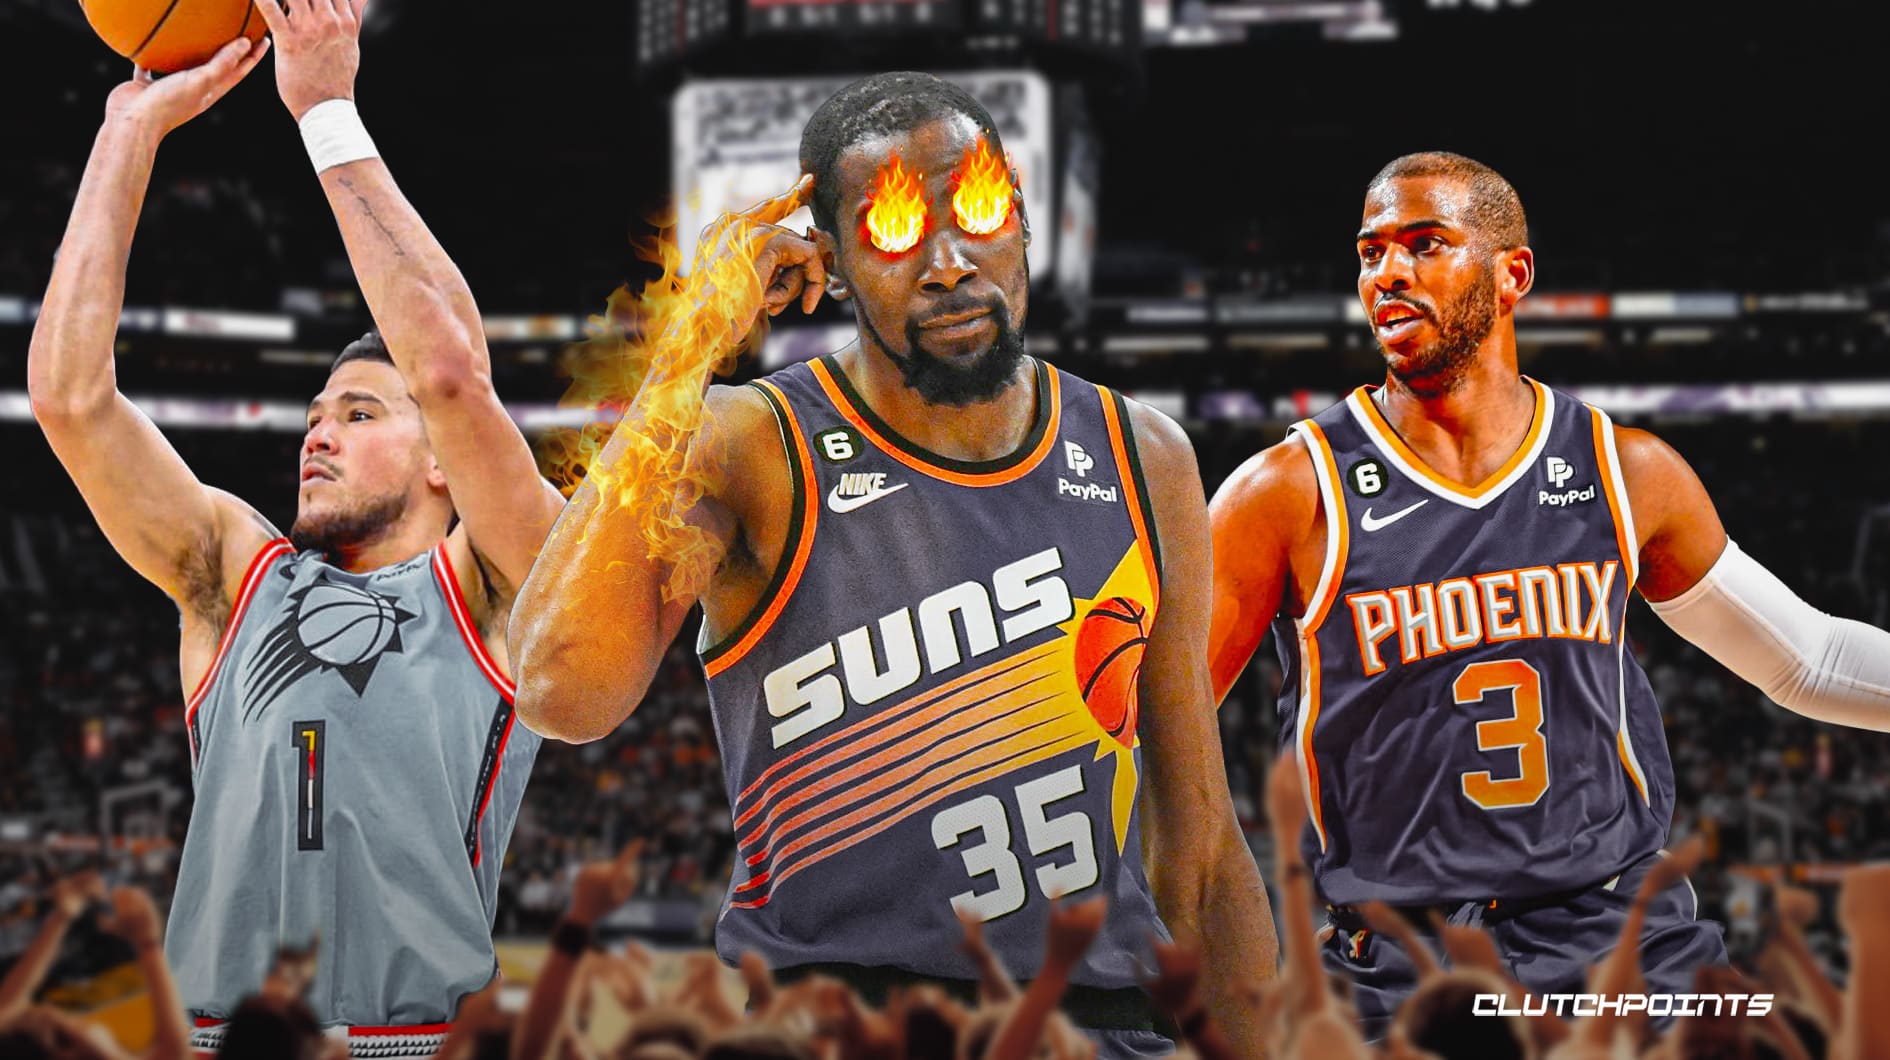 Final Score: Suns get blasted by Rockets on 90s night. I guess